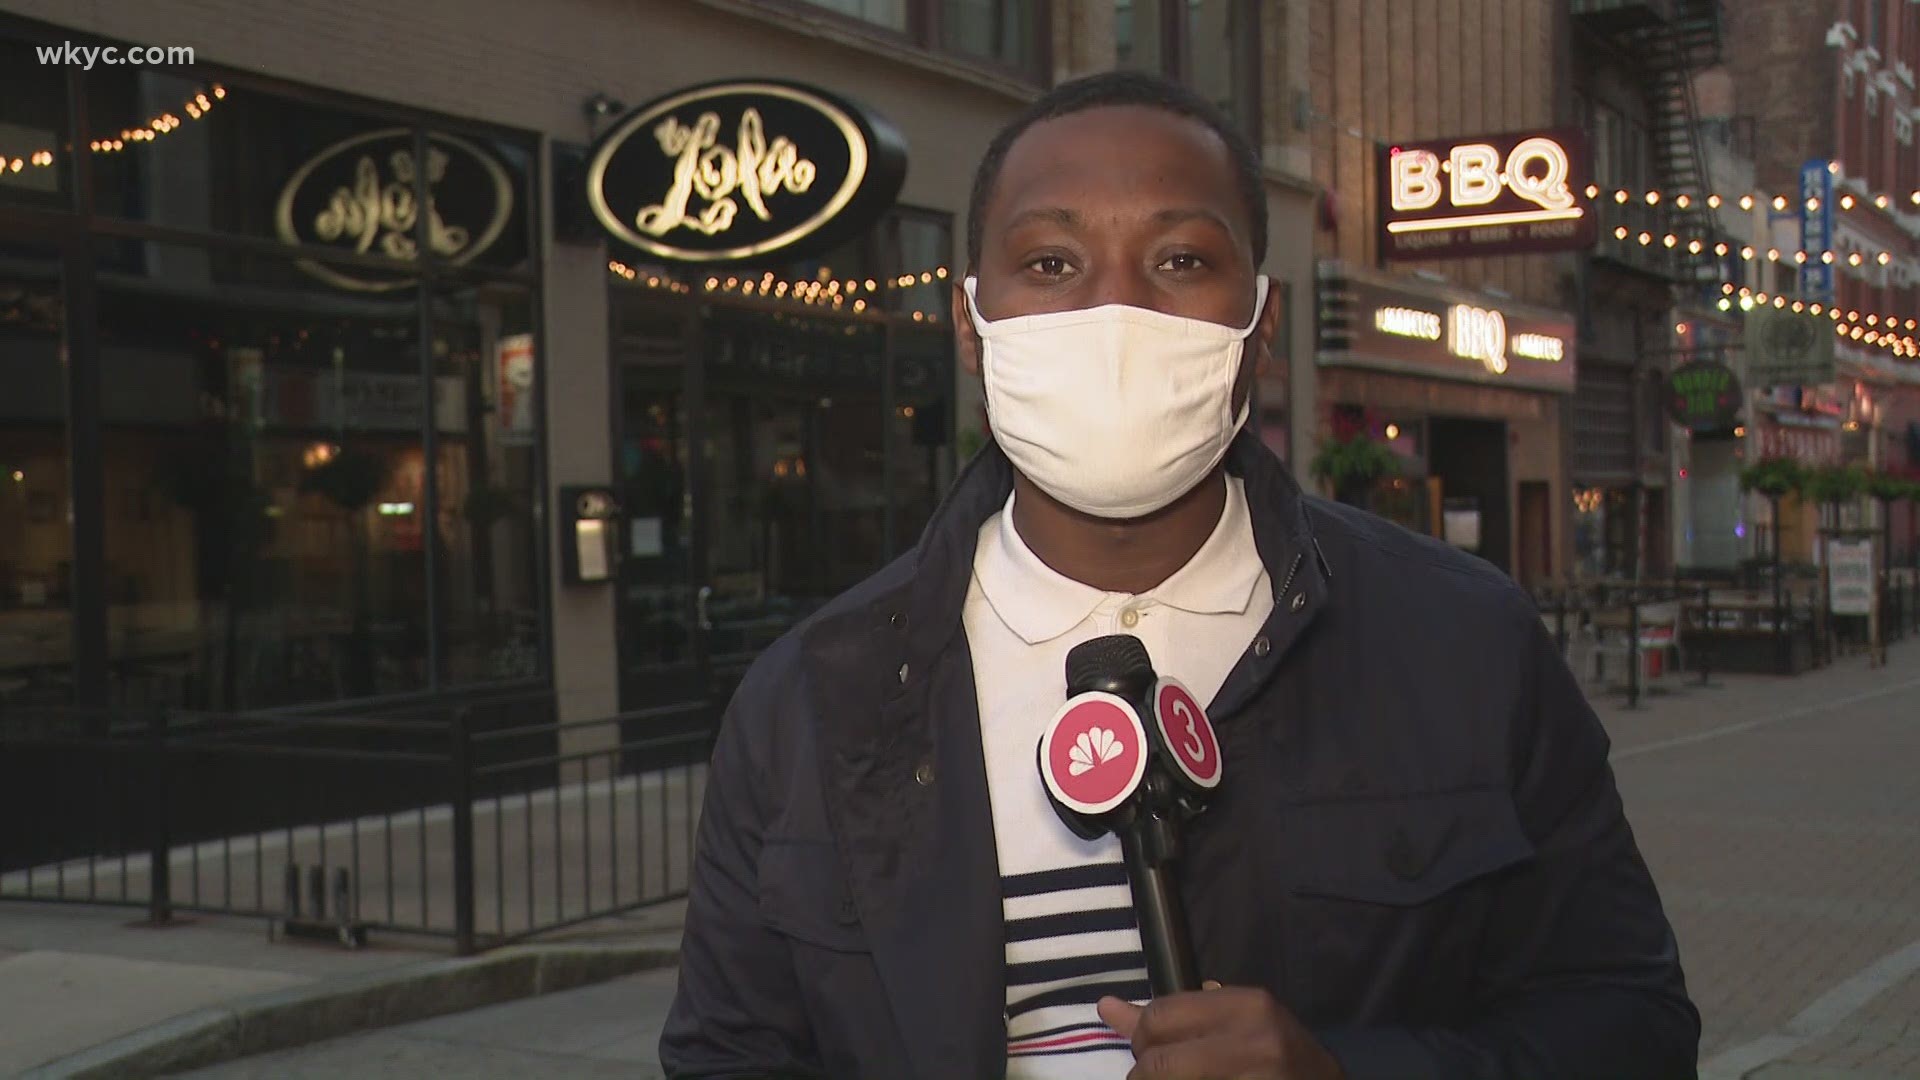 3News' Brandon Simmons reports from outside Lola on E. 4th Street. Symon said that the COVID-19 pandemic is to blame.